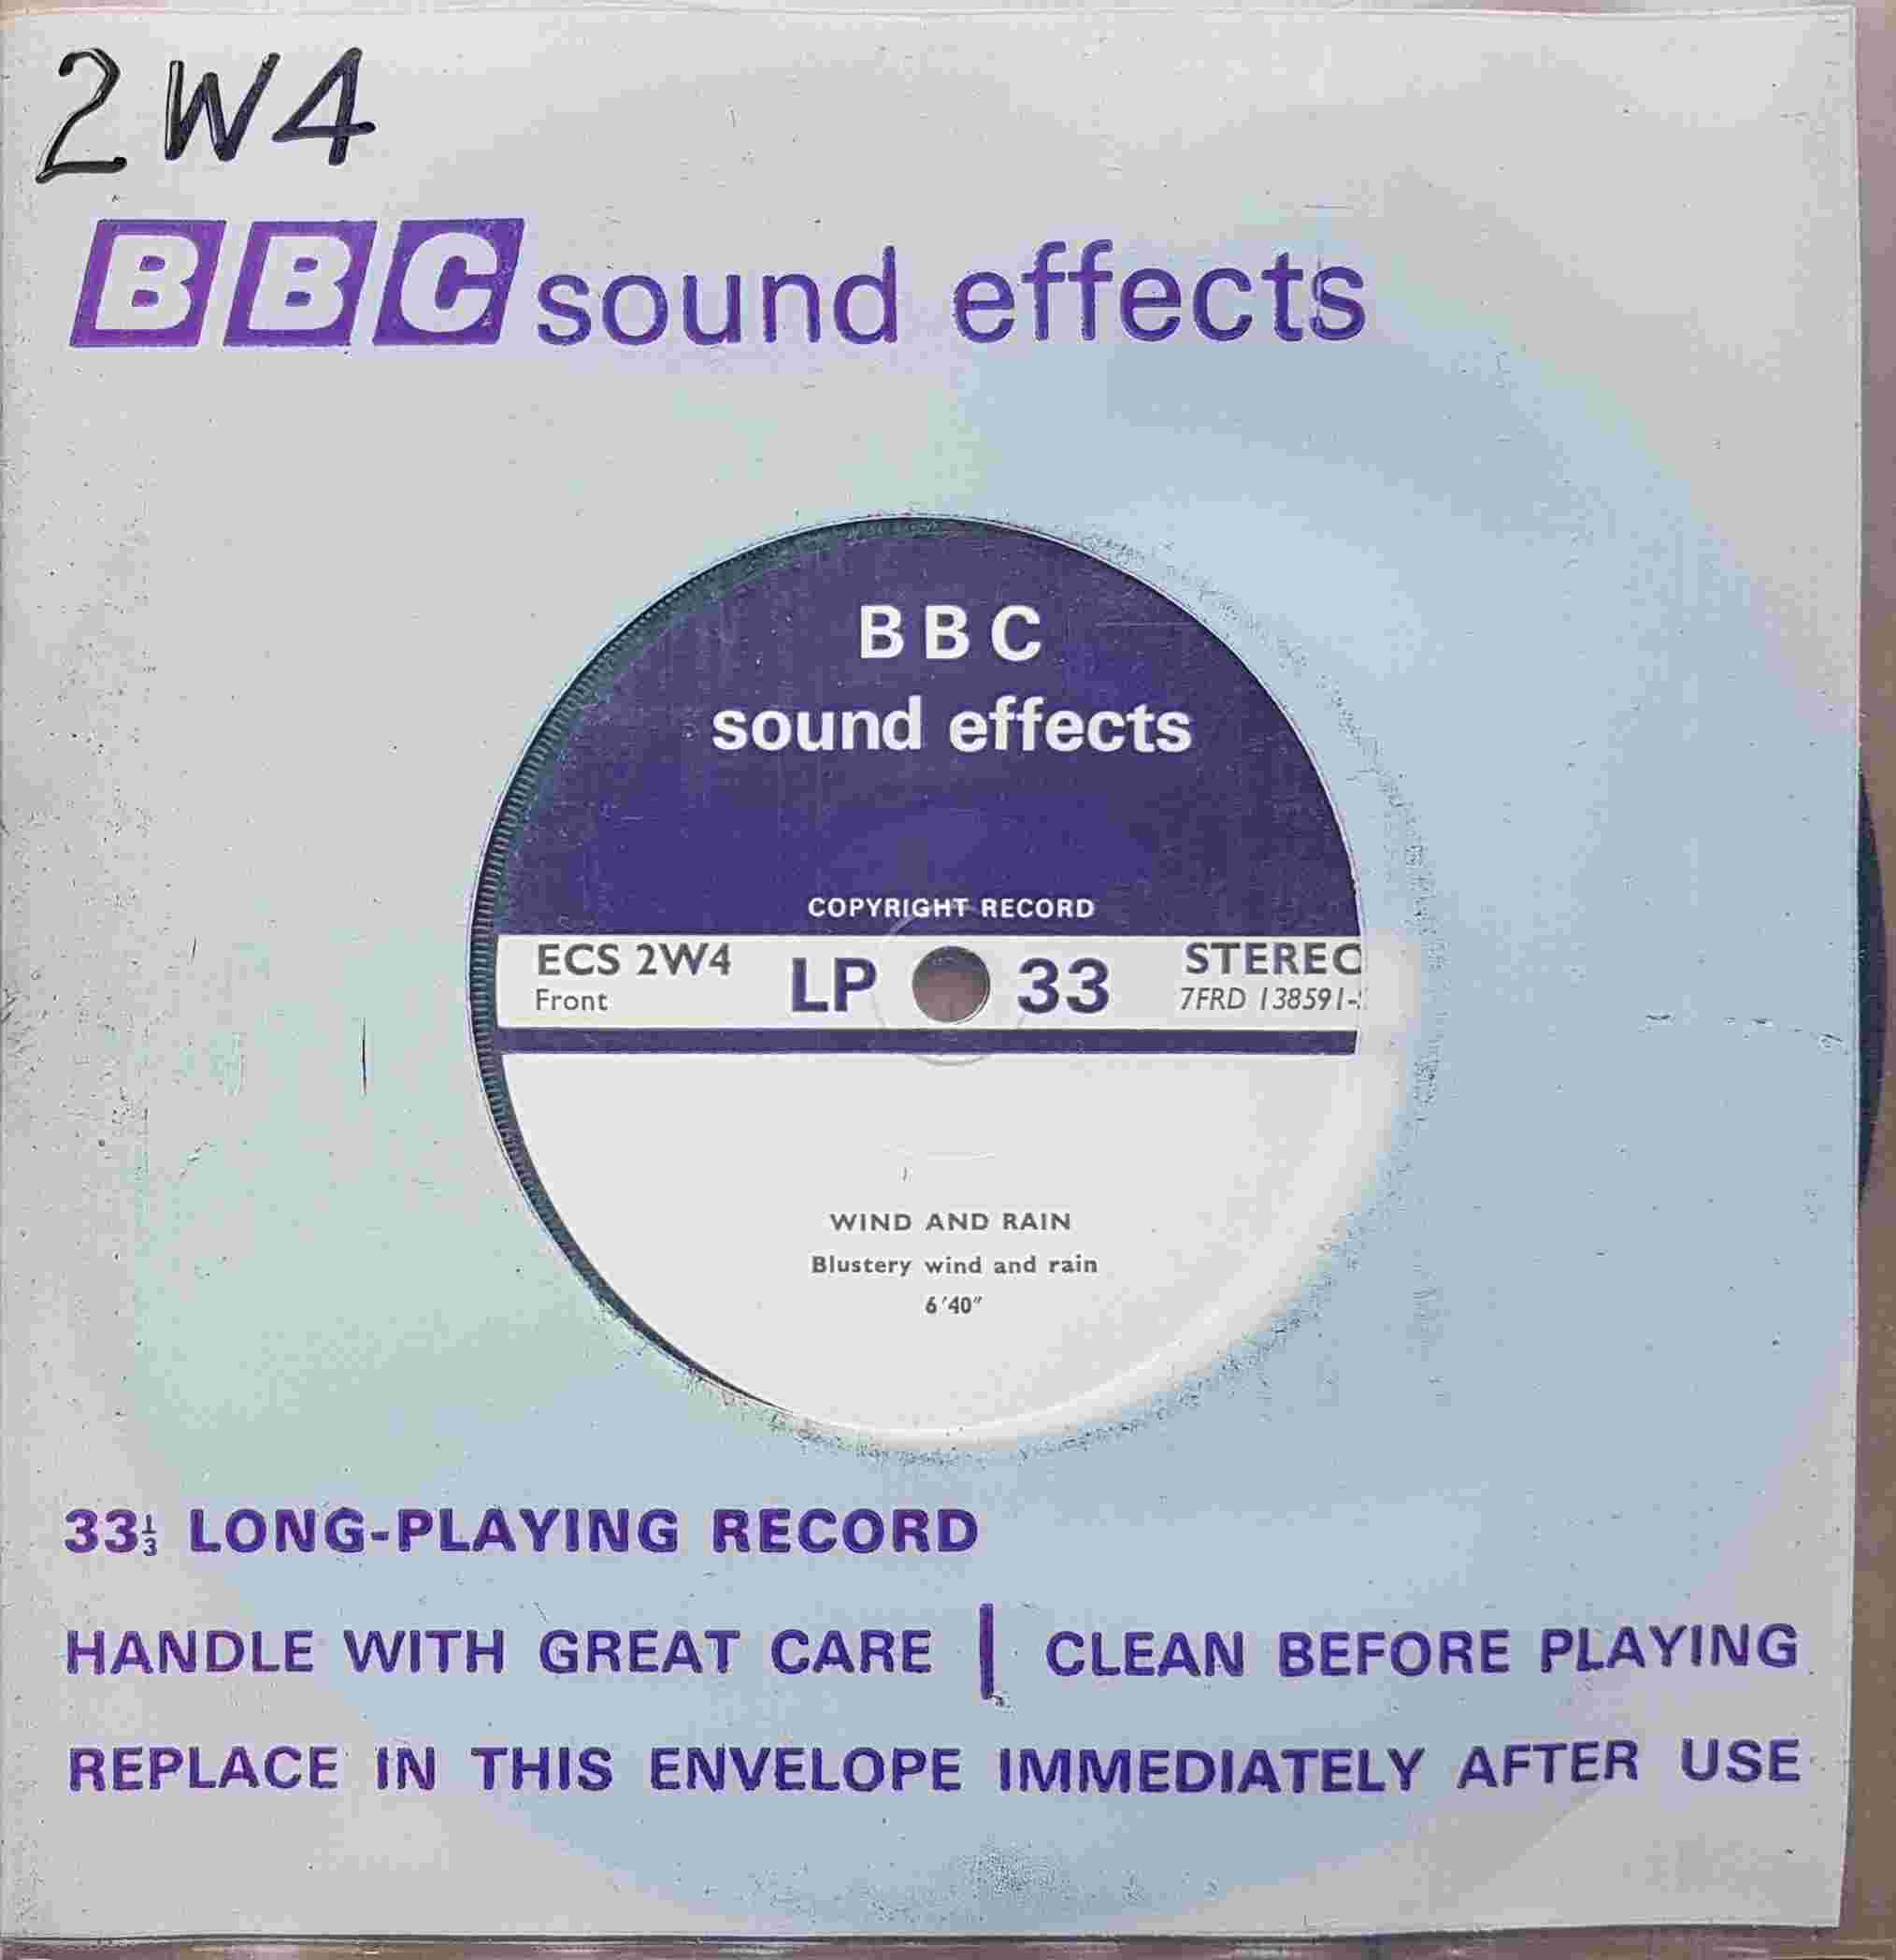 Picture of ECS 2W4 Wind and rain / Rain by artist Not registered from the BBC singles - Records and Tapes library